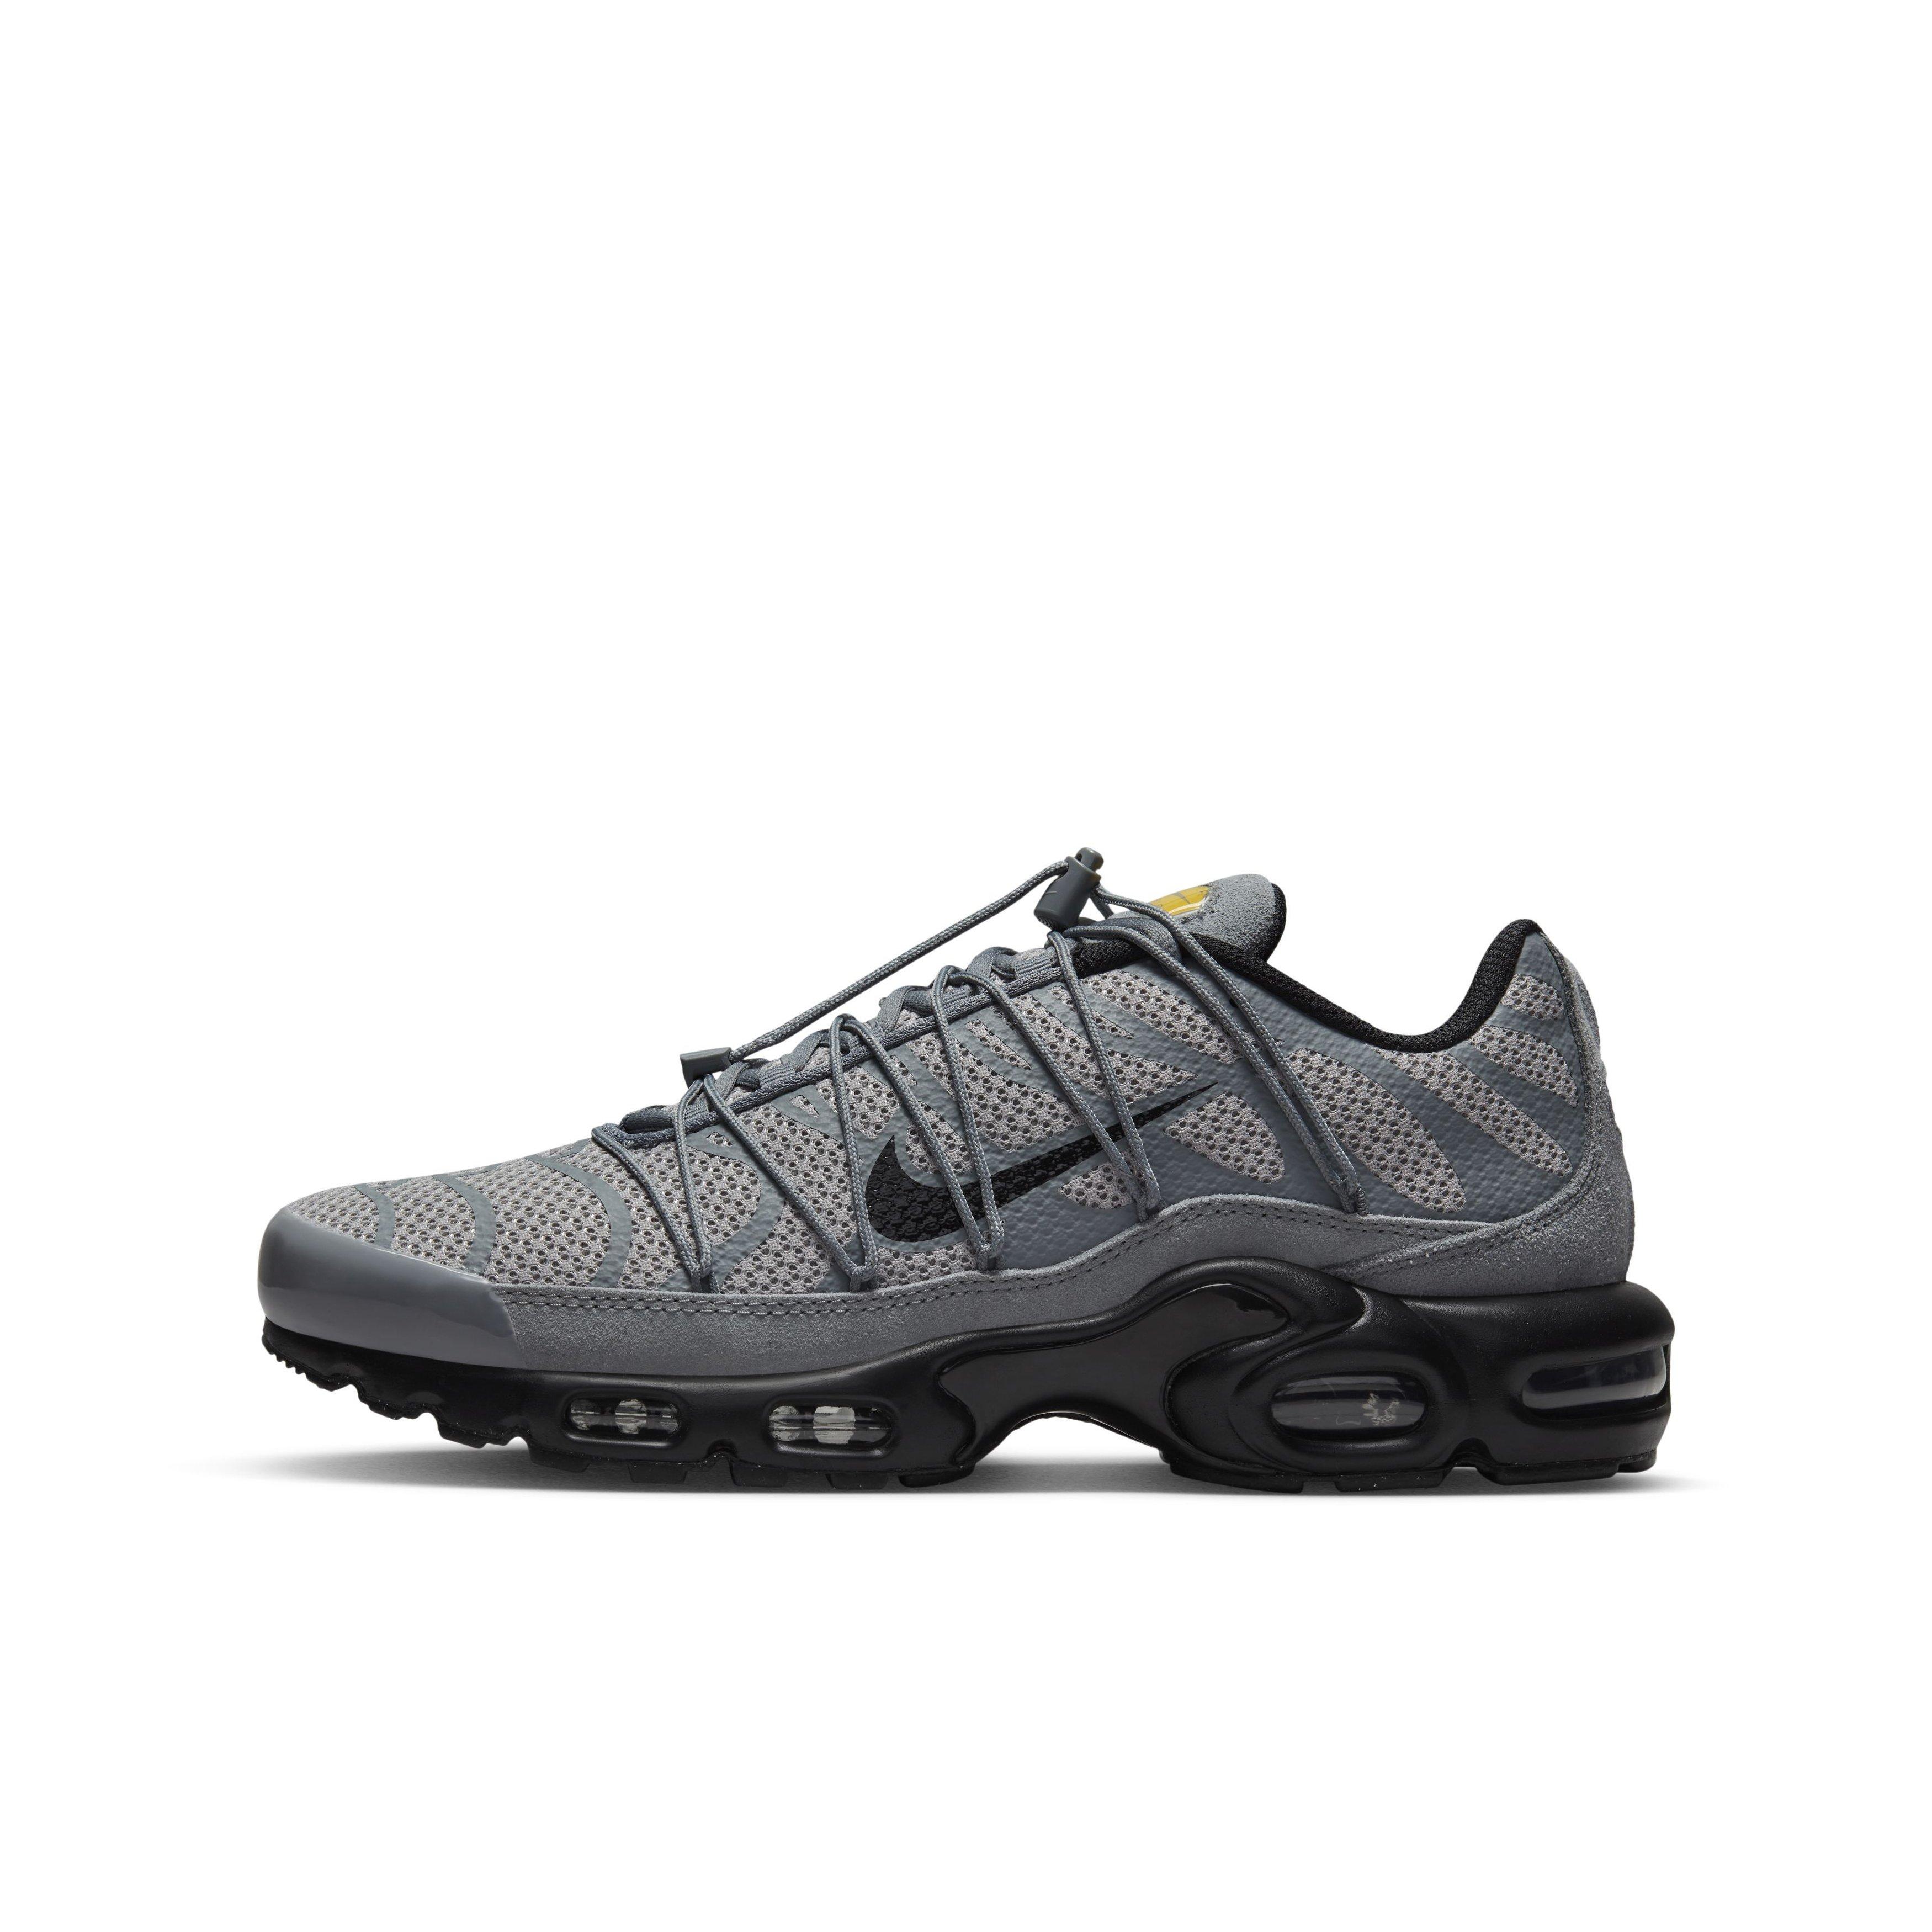 Nike Air Max Plus (Tn) 'Cement' A must have in any collection